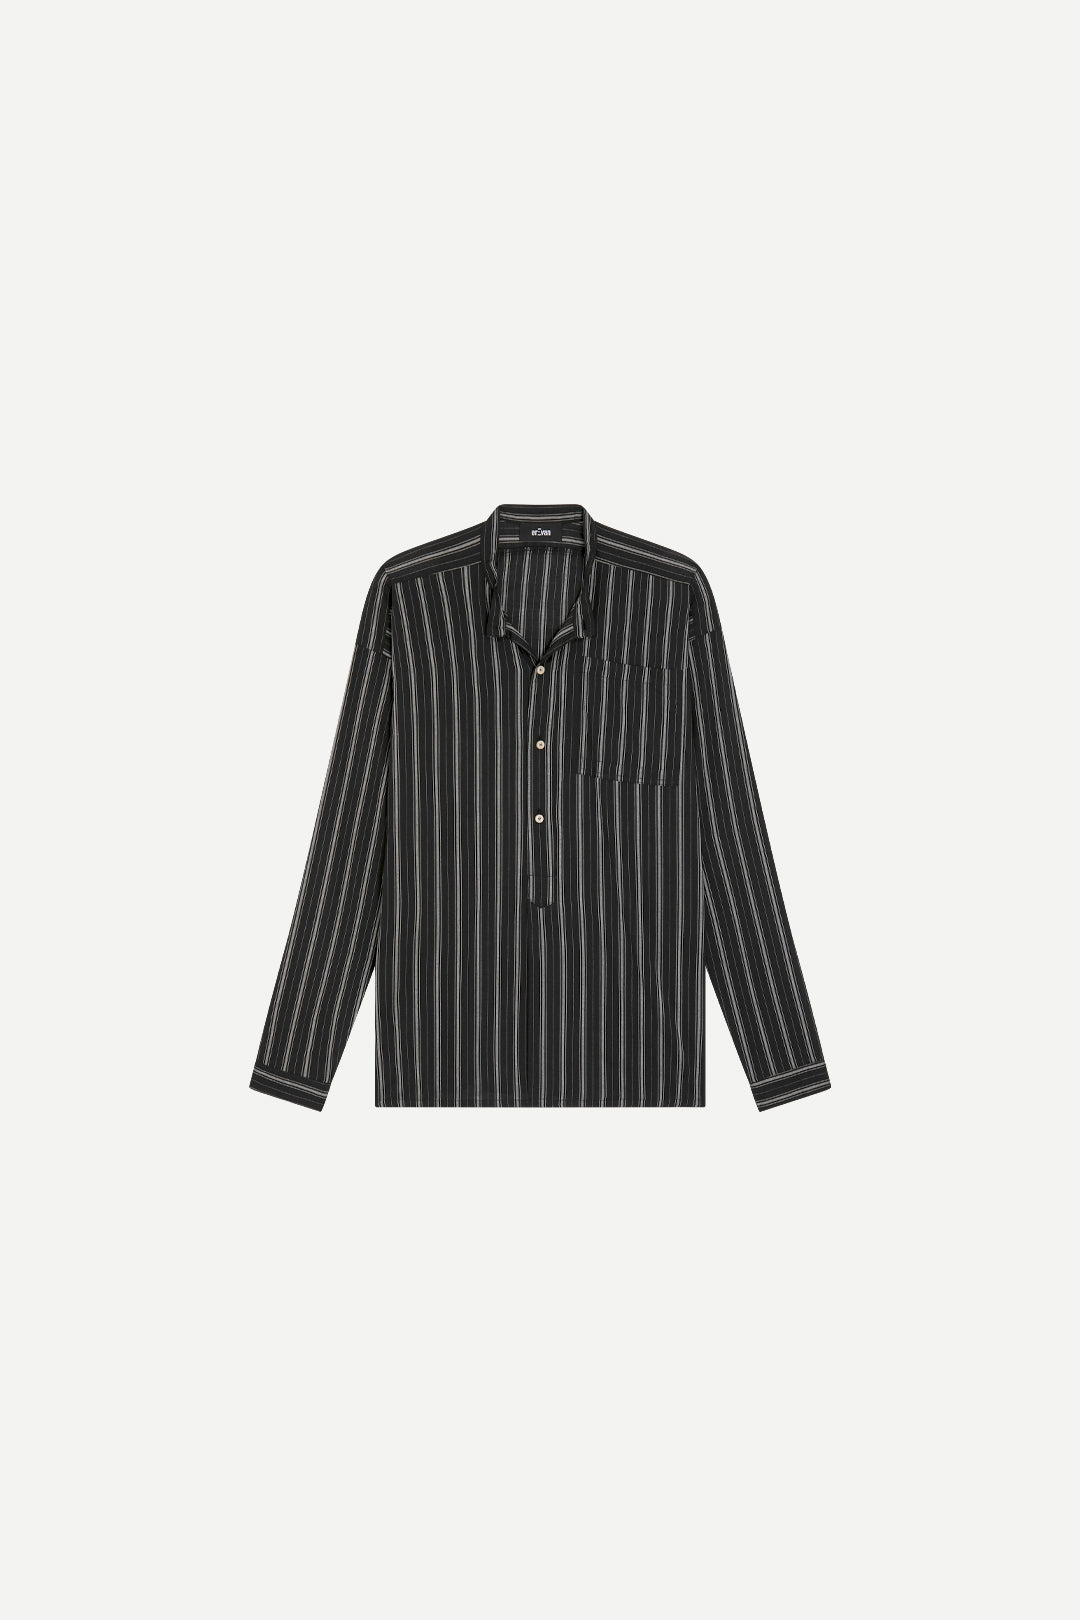 CHEMISE LICES RAYURE NOIRE